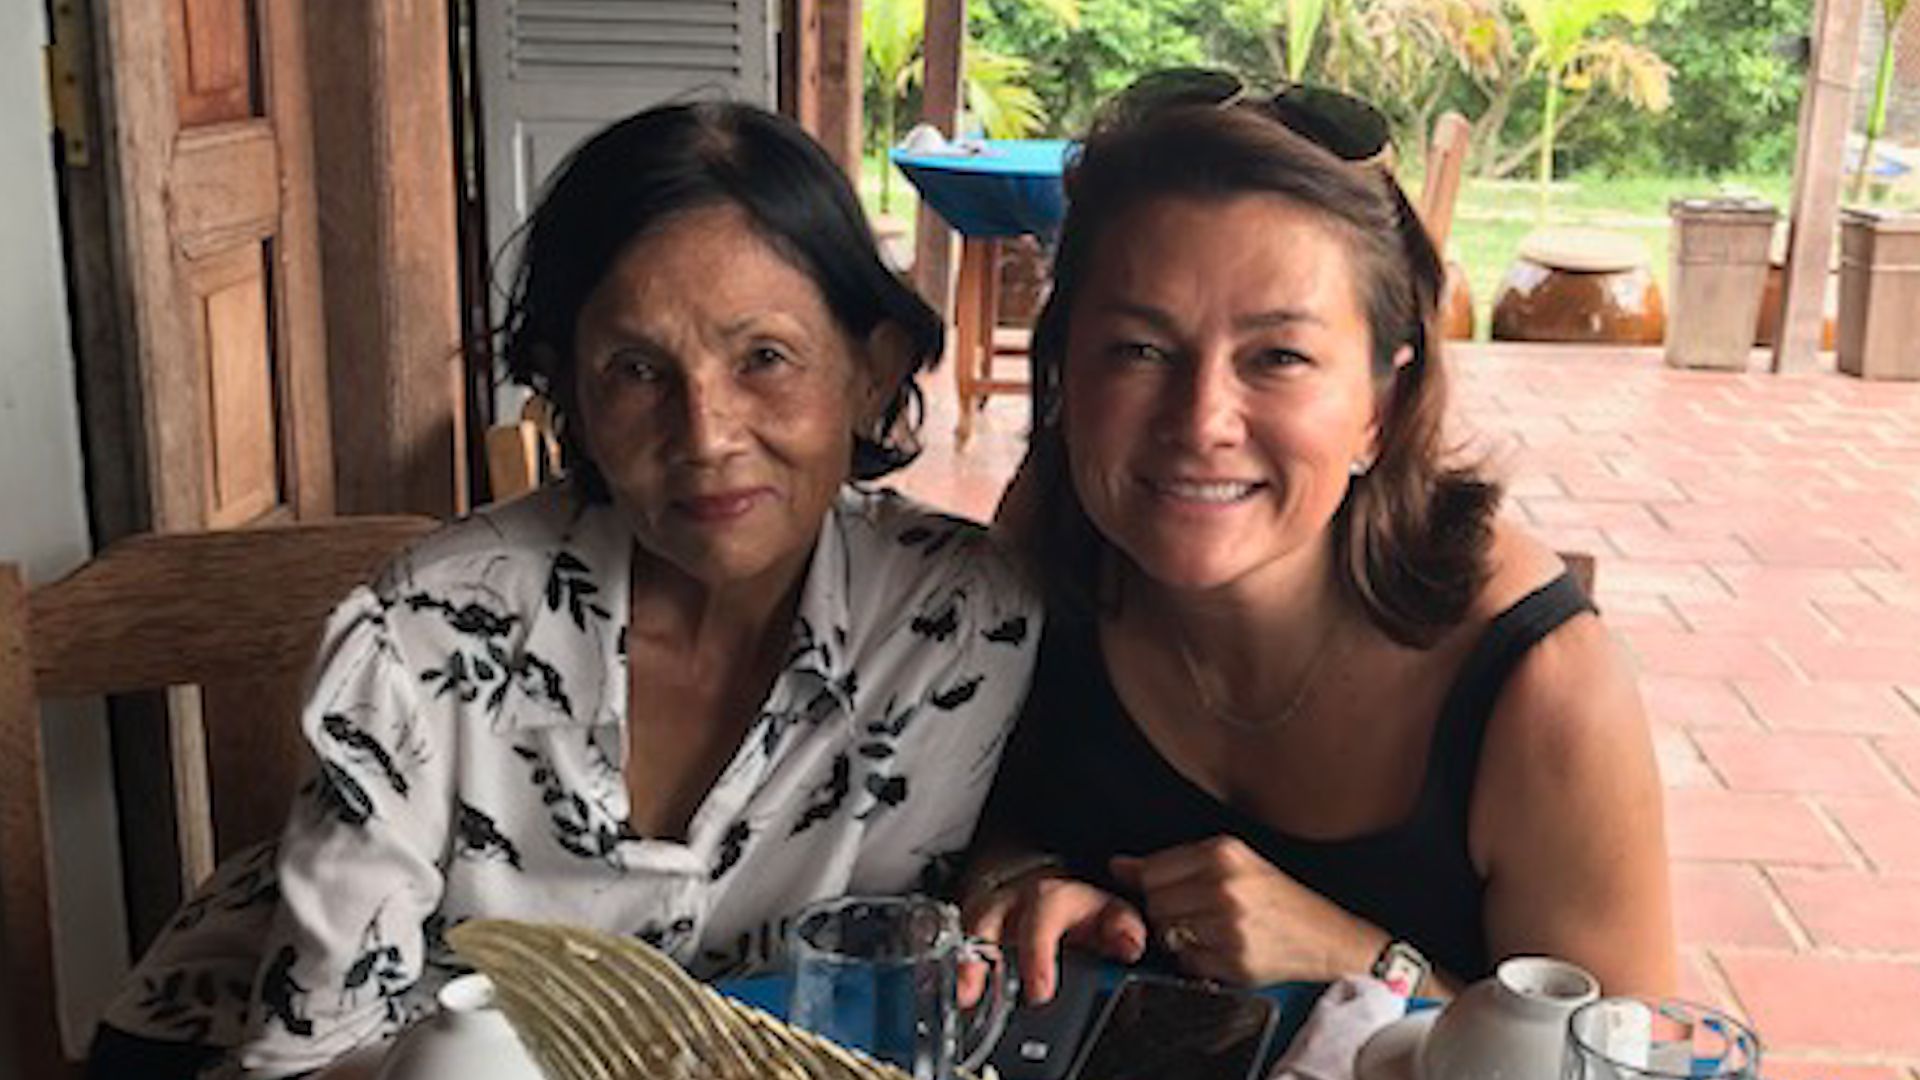 Vietnam revisited: What I learned taking my mom back to her birthplace